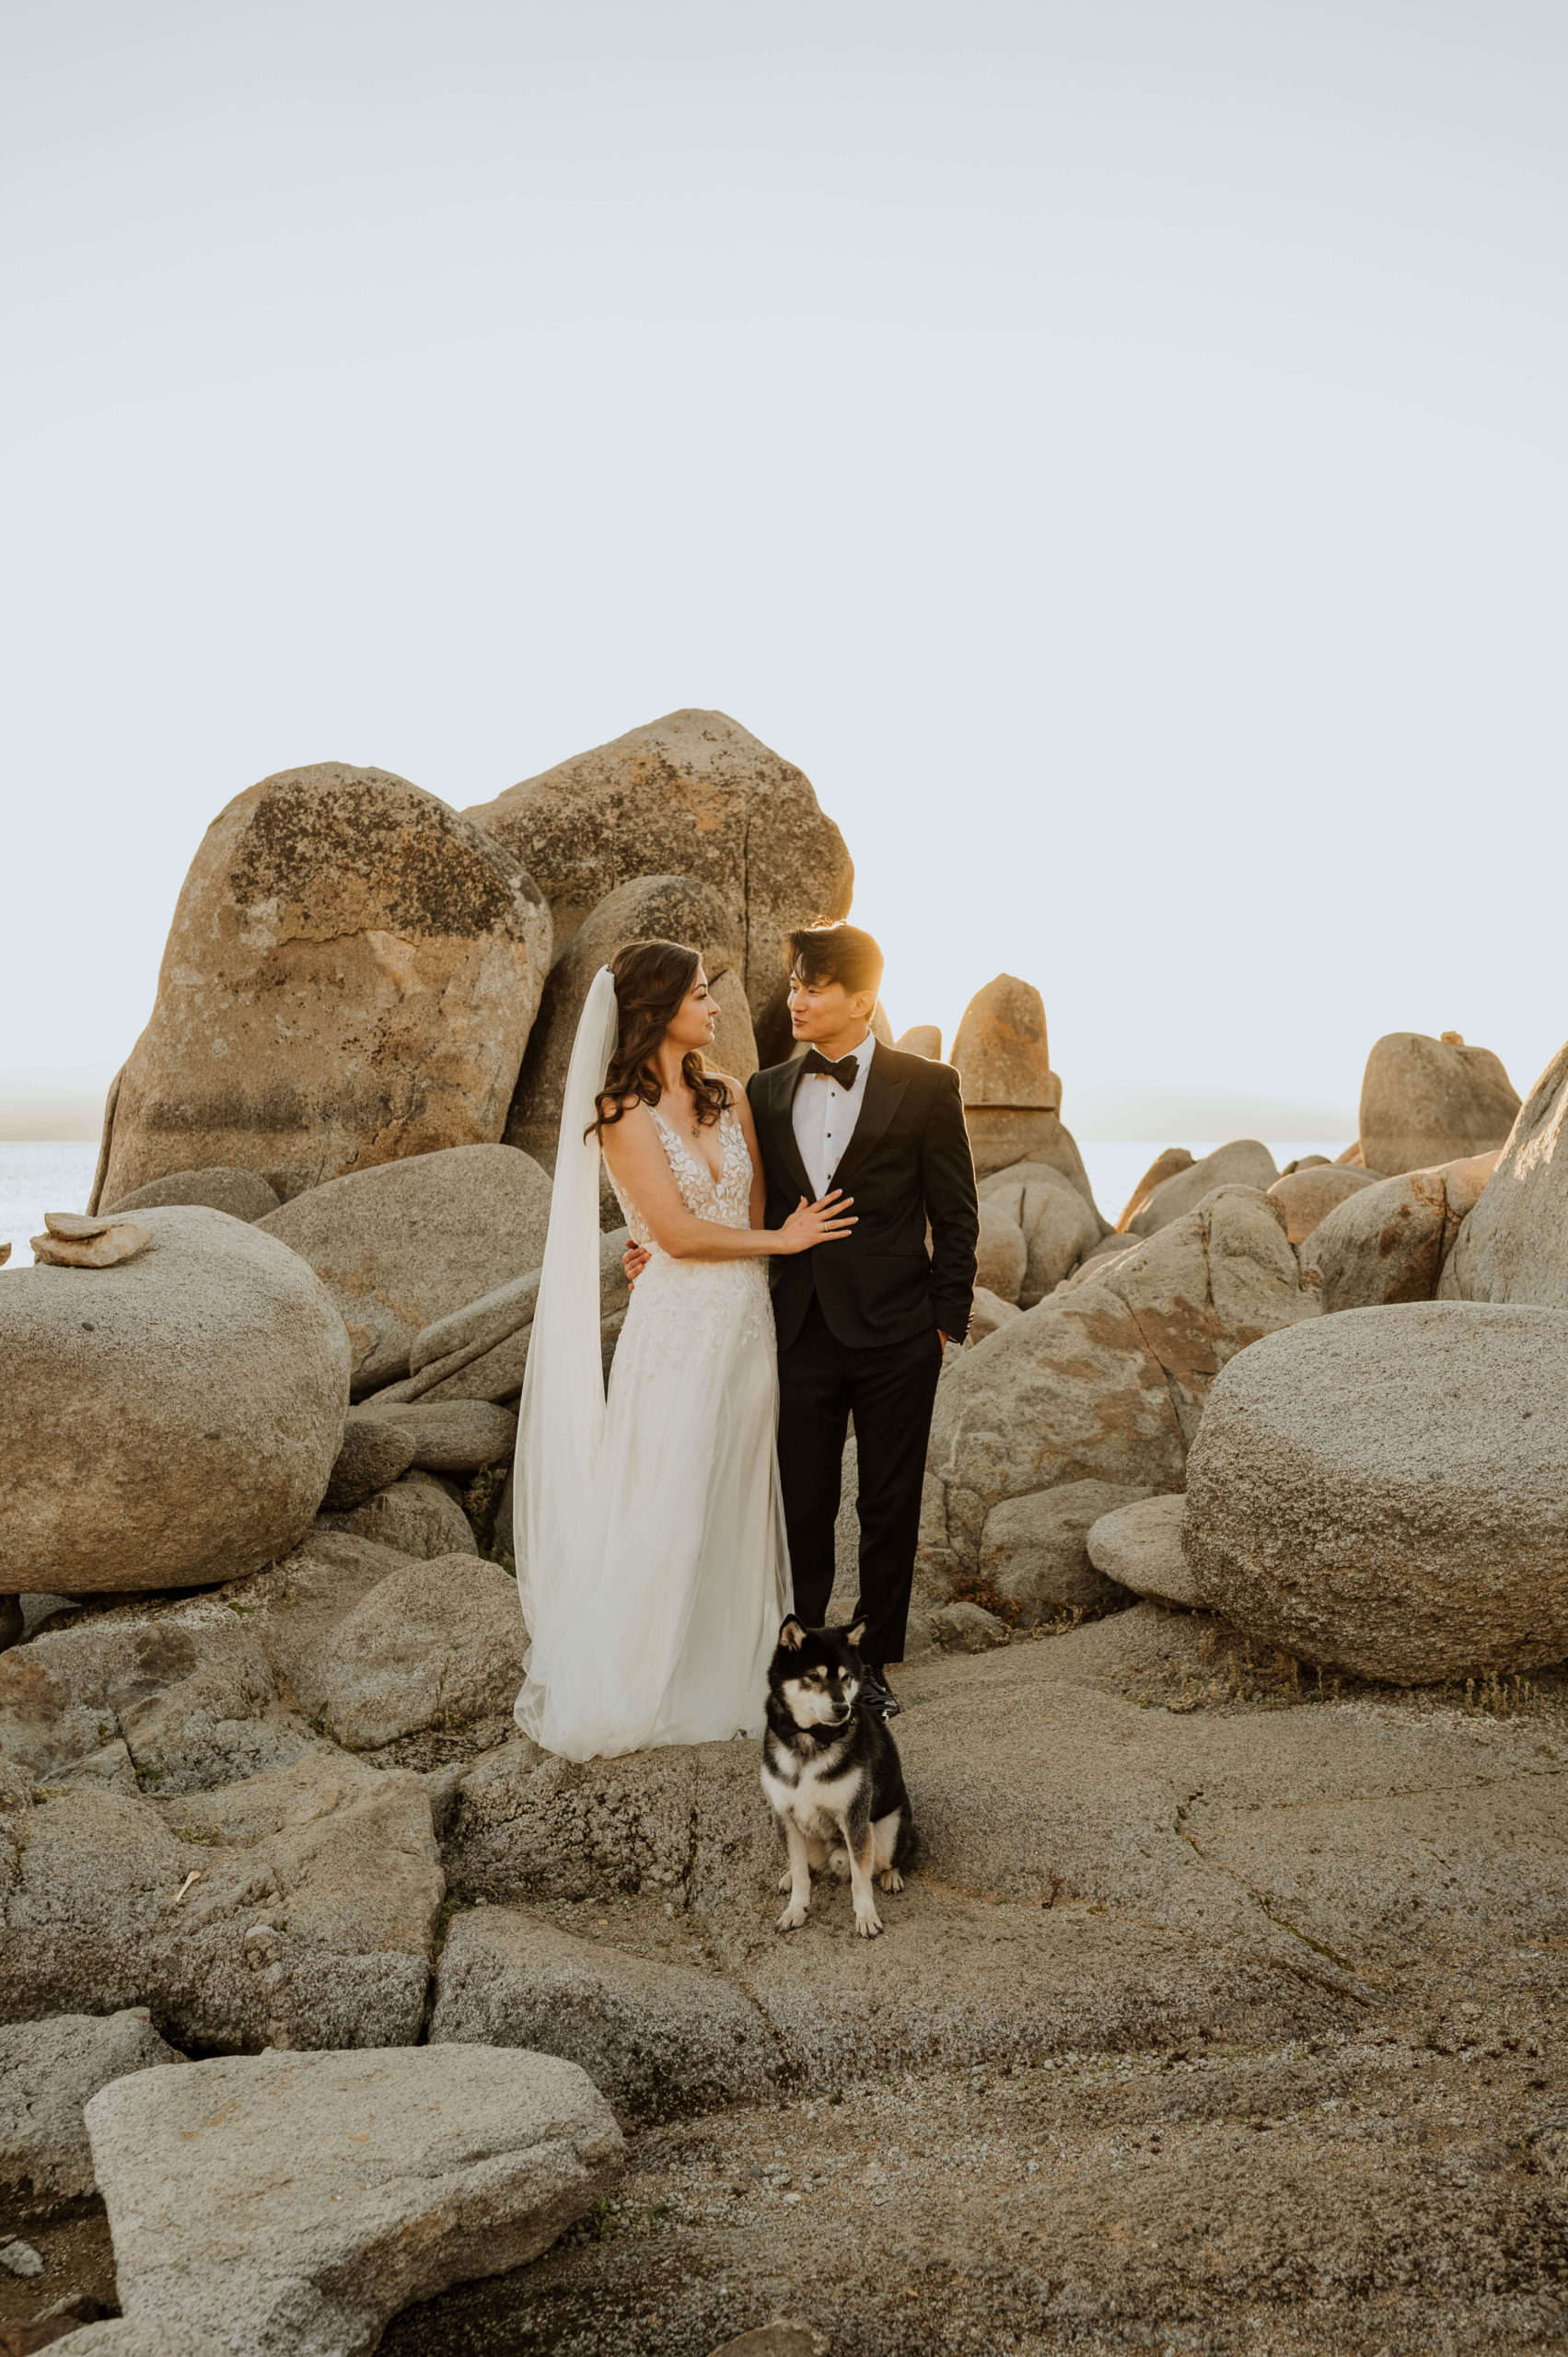 A couple eloping with their dog in Lake Tahoe, California